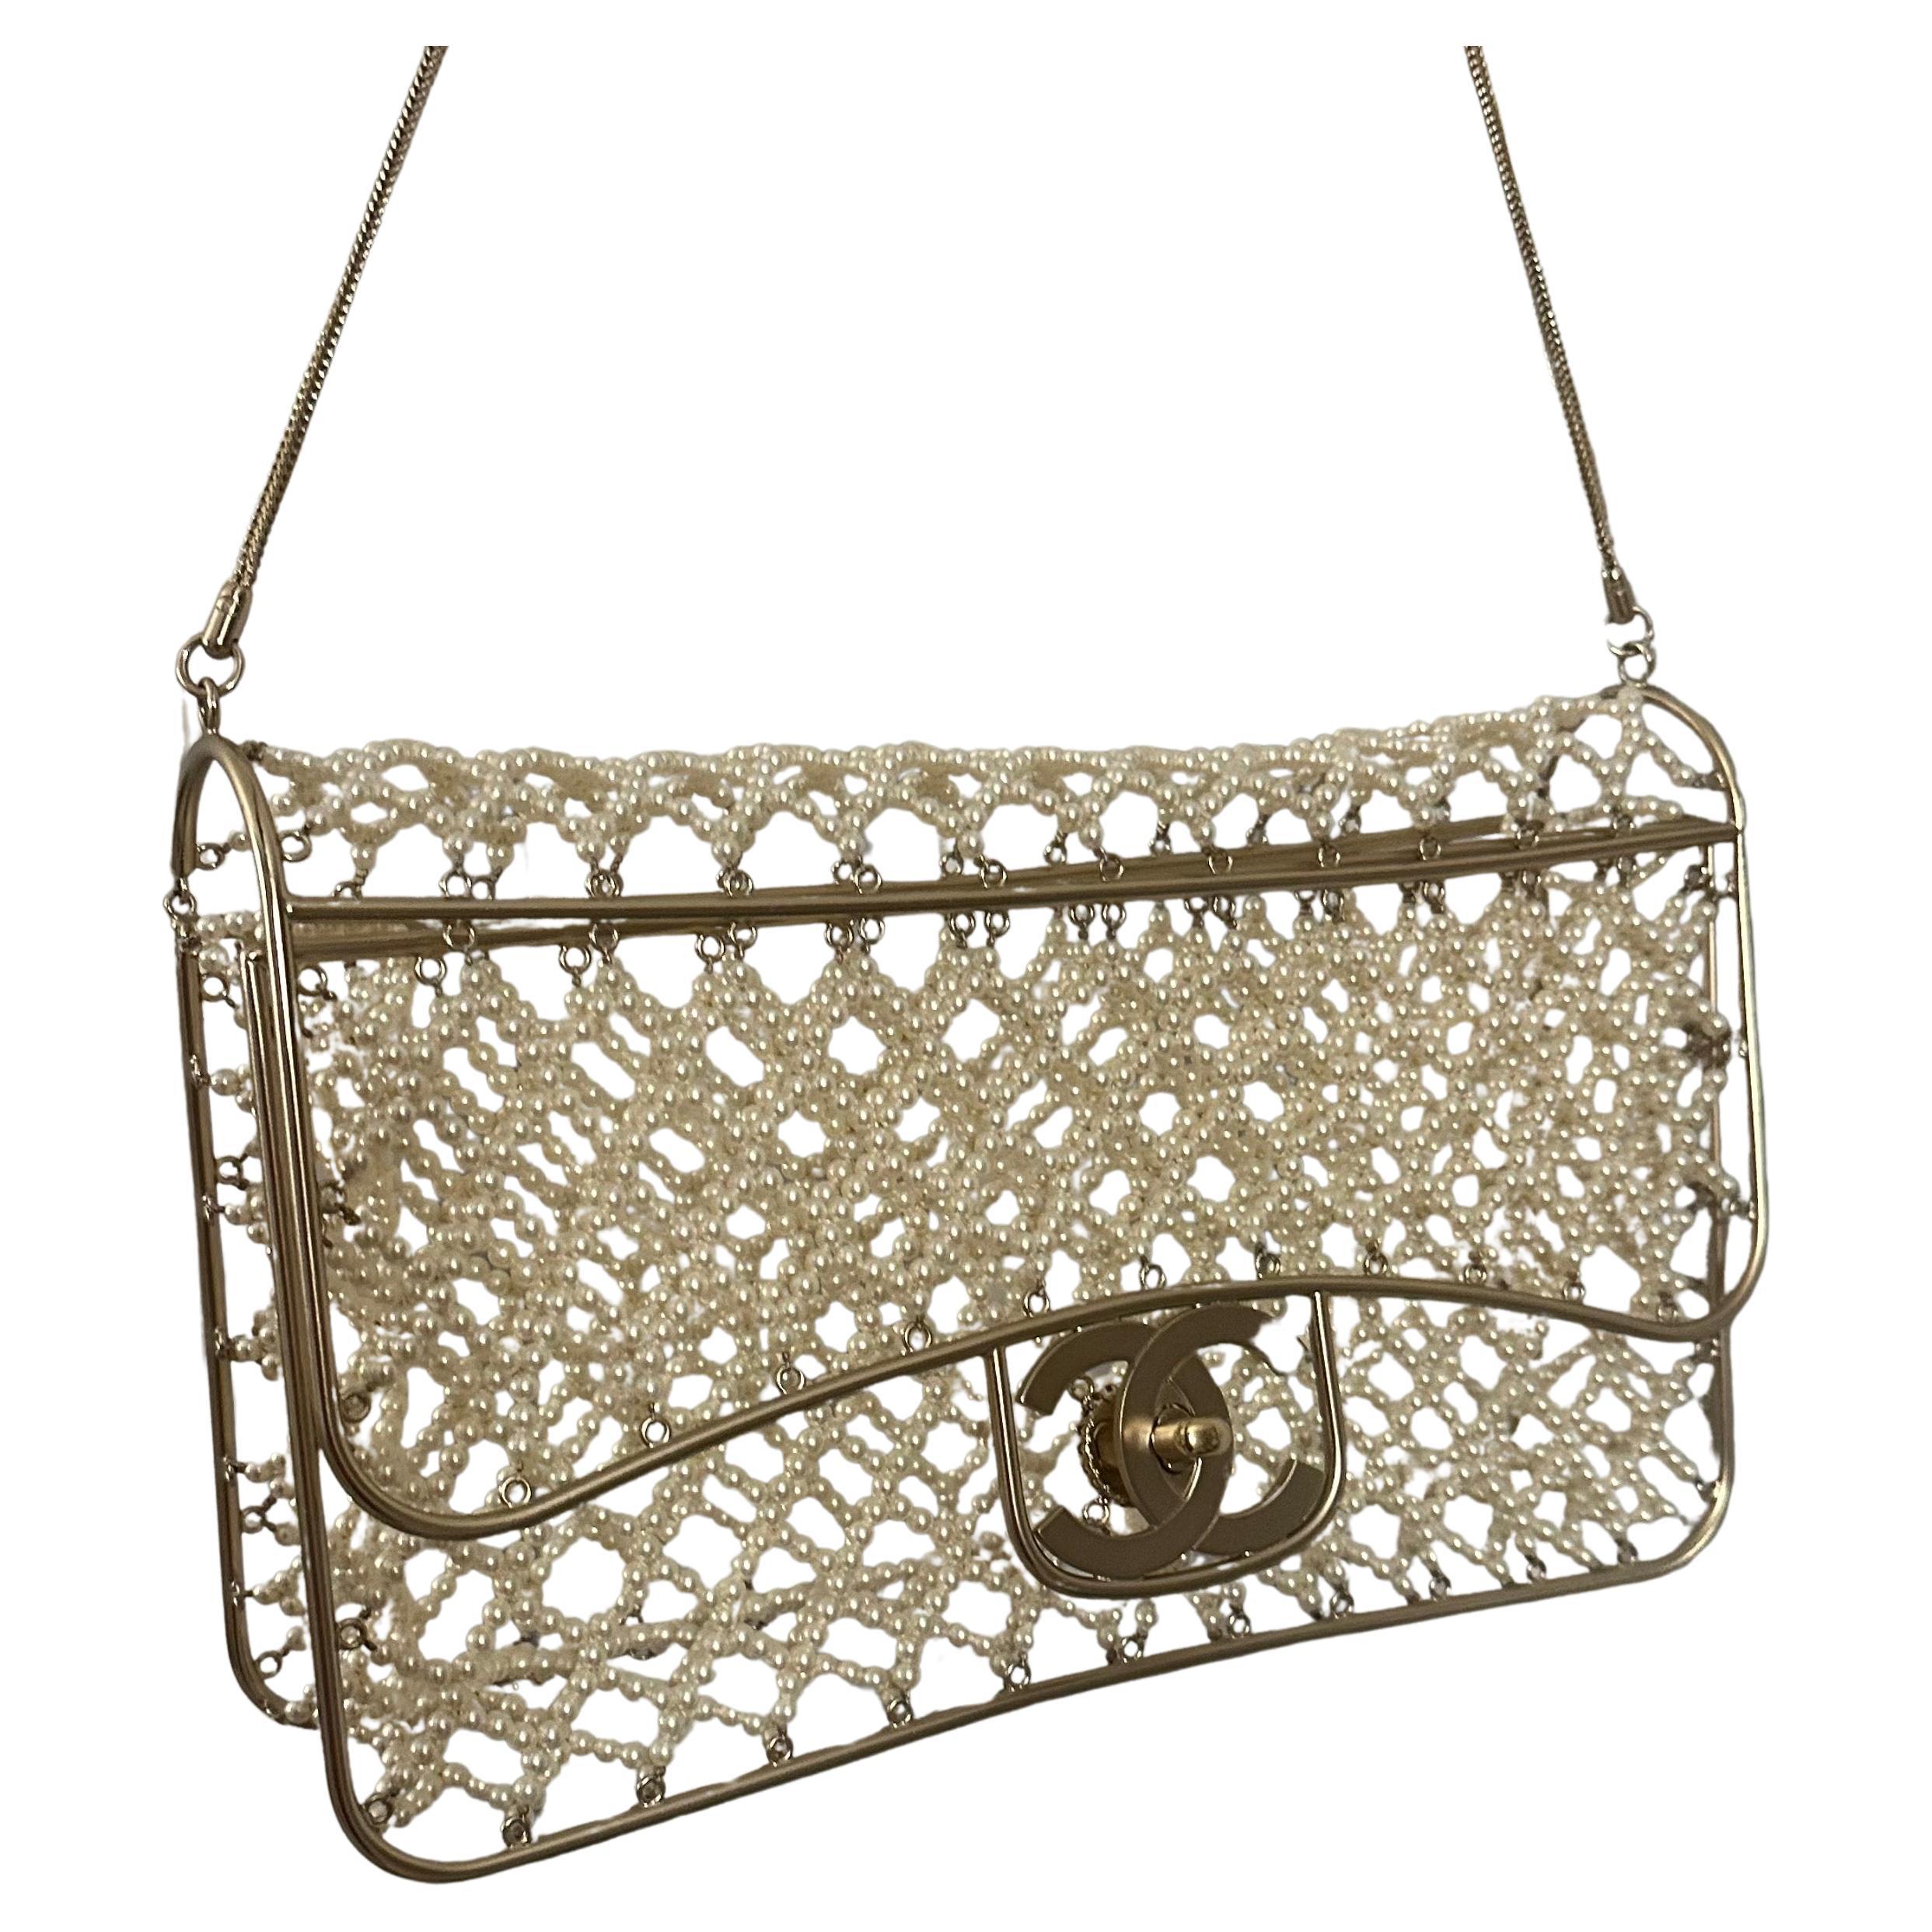 Chanel Runway 2013 Pearl Caged Flap bag.

Rare collector piece. 

Excellent condition. 